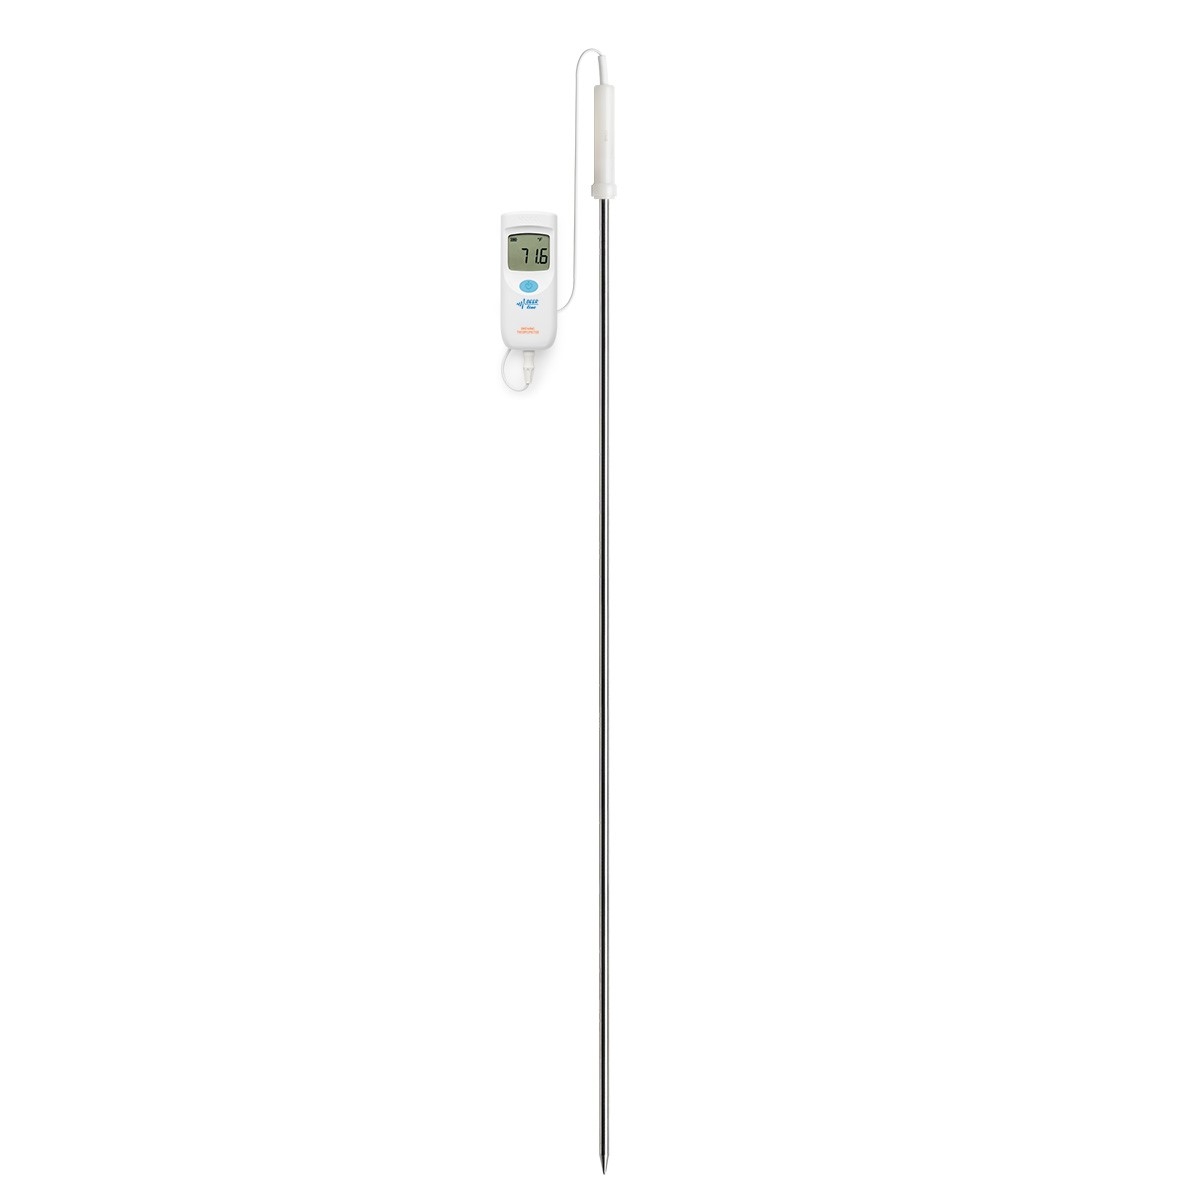 https://www.hannainst.com/hs-fs/hubfs/001-website/images/brewing-thermometer-full-view-hi935012.jpg?width=1200&name=brewing-thermometer-full-view-hi935012.jpg